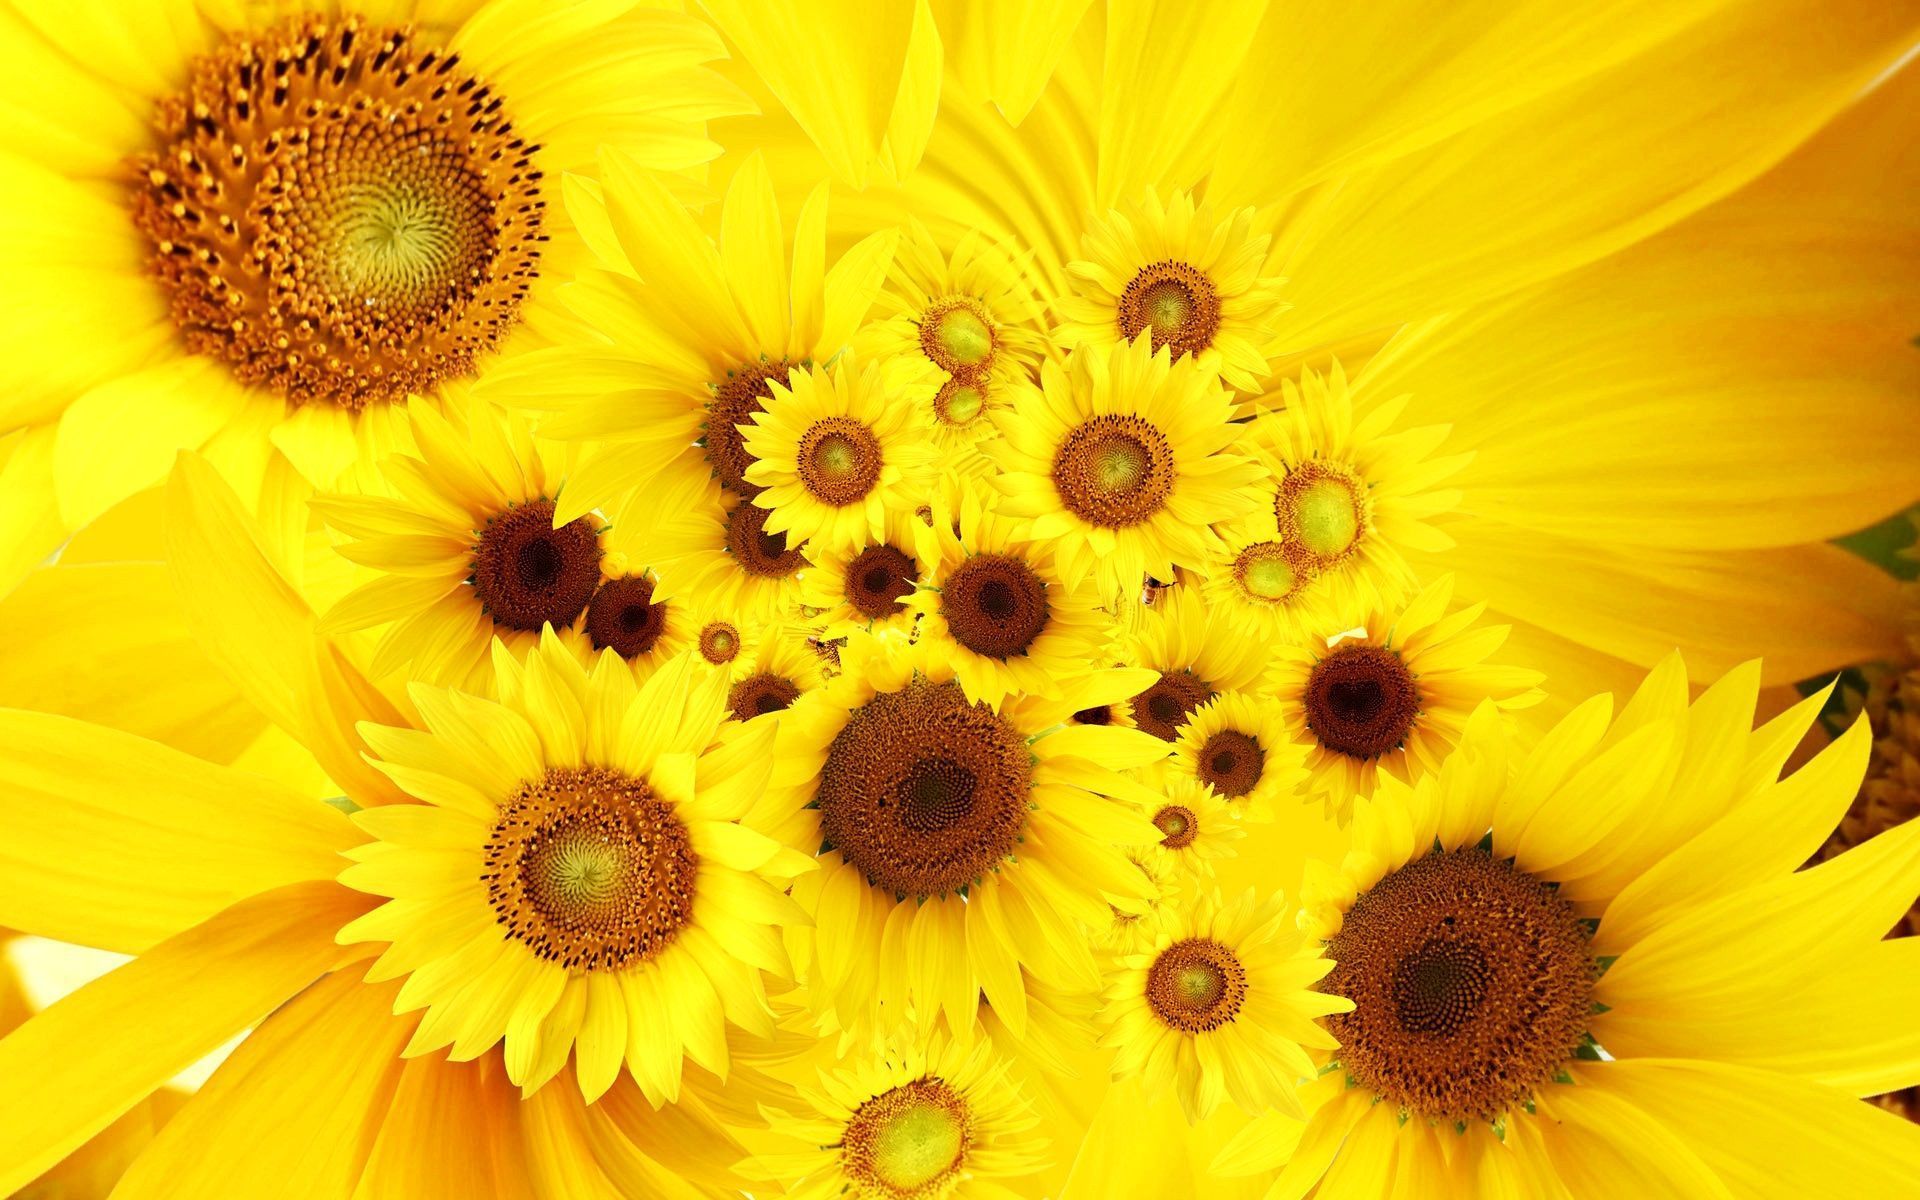 Cool Sunflowers Wallpapers | HD Wallpapers - Pictures of Flowers